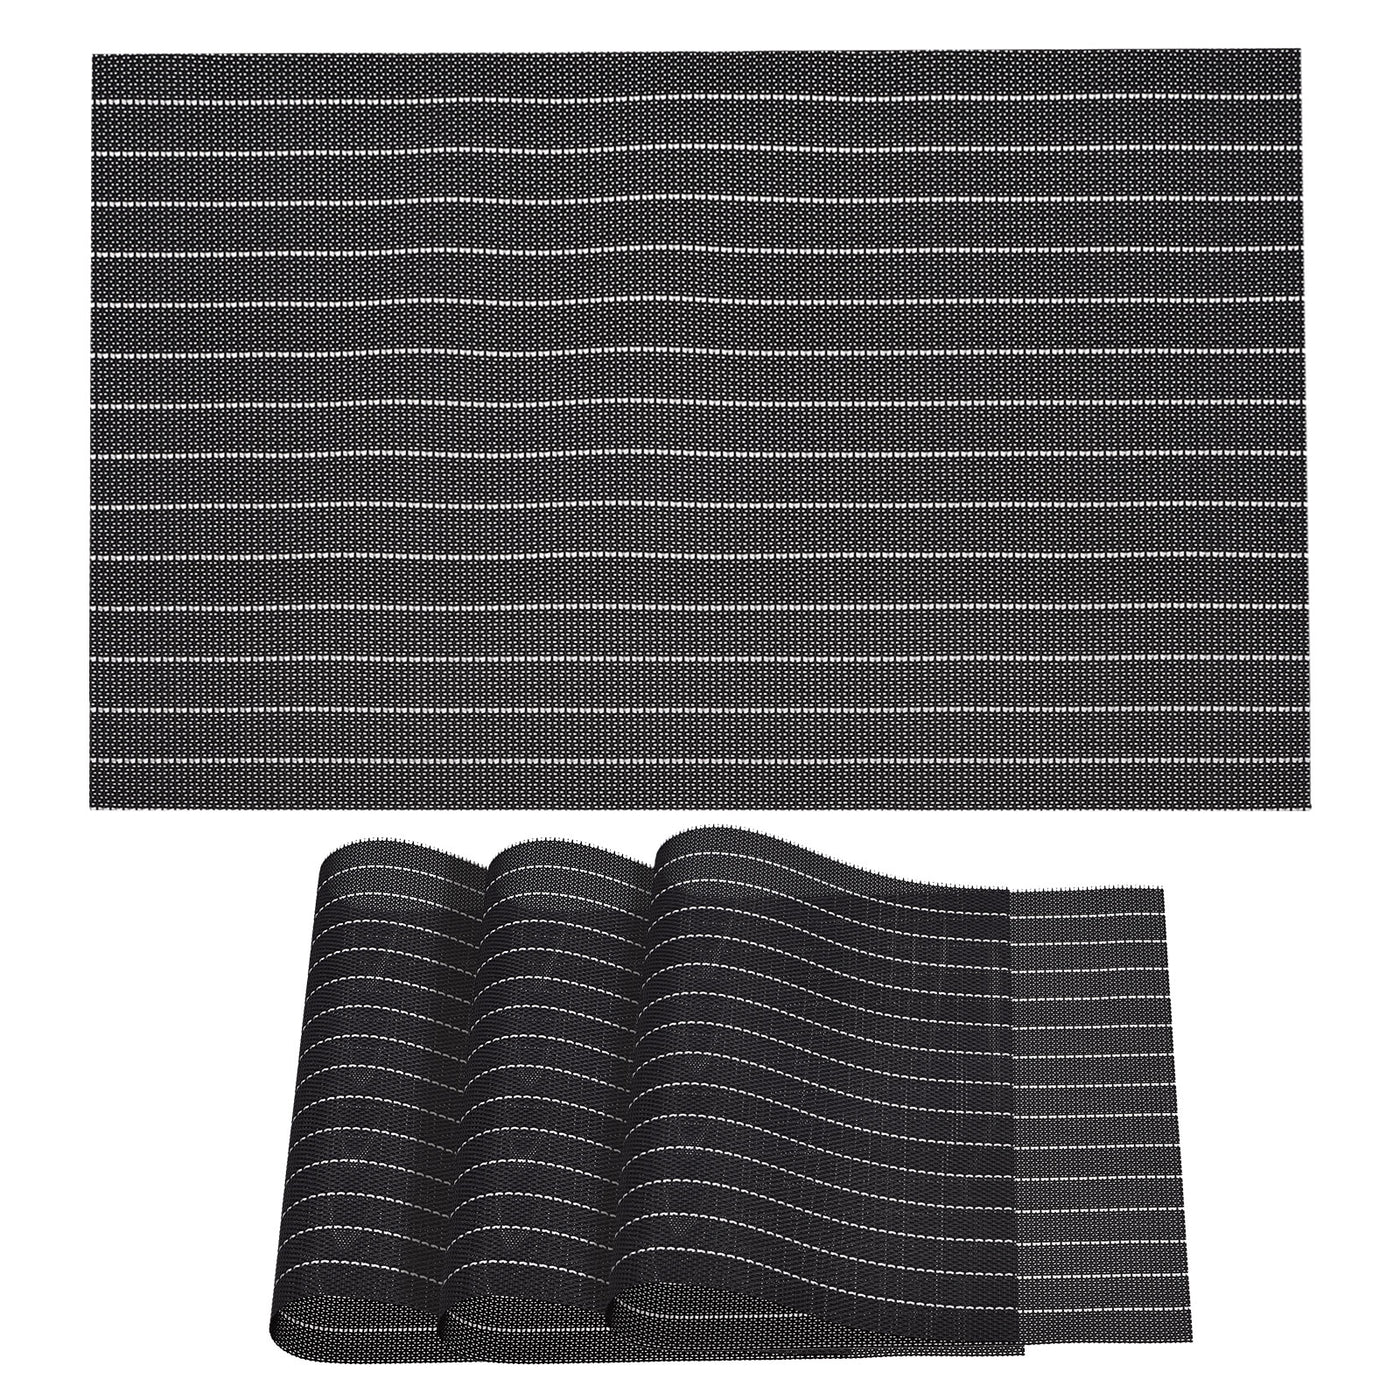 uxcell Uxcell Place Mats, 450x300mm Table Mats Set of 4 PVC Washable Woven Placemat Black